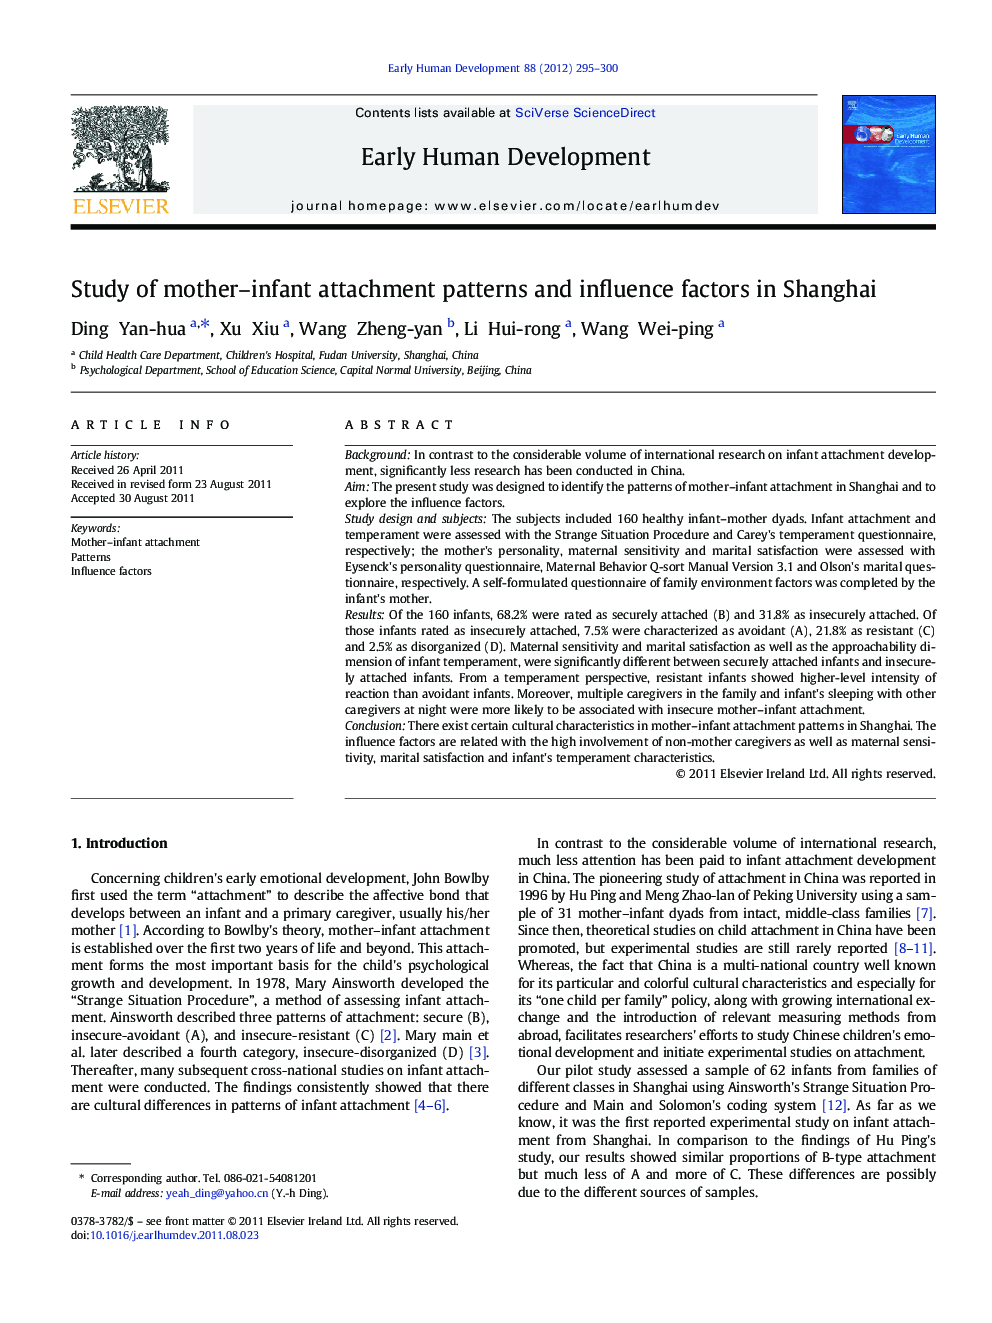 Study of mother-infant attachment patterns and influence factors in Shanghai